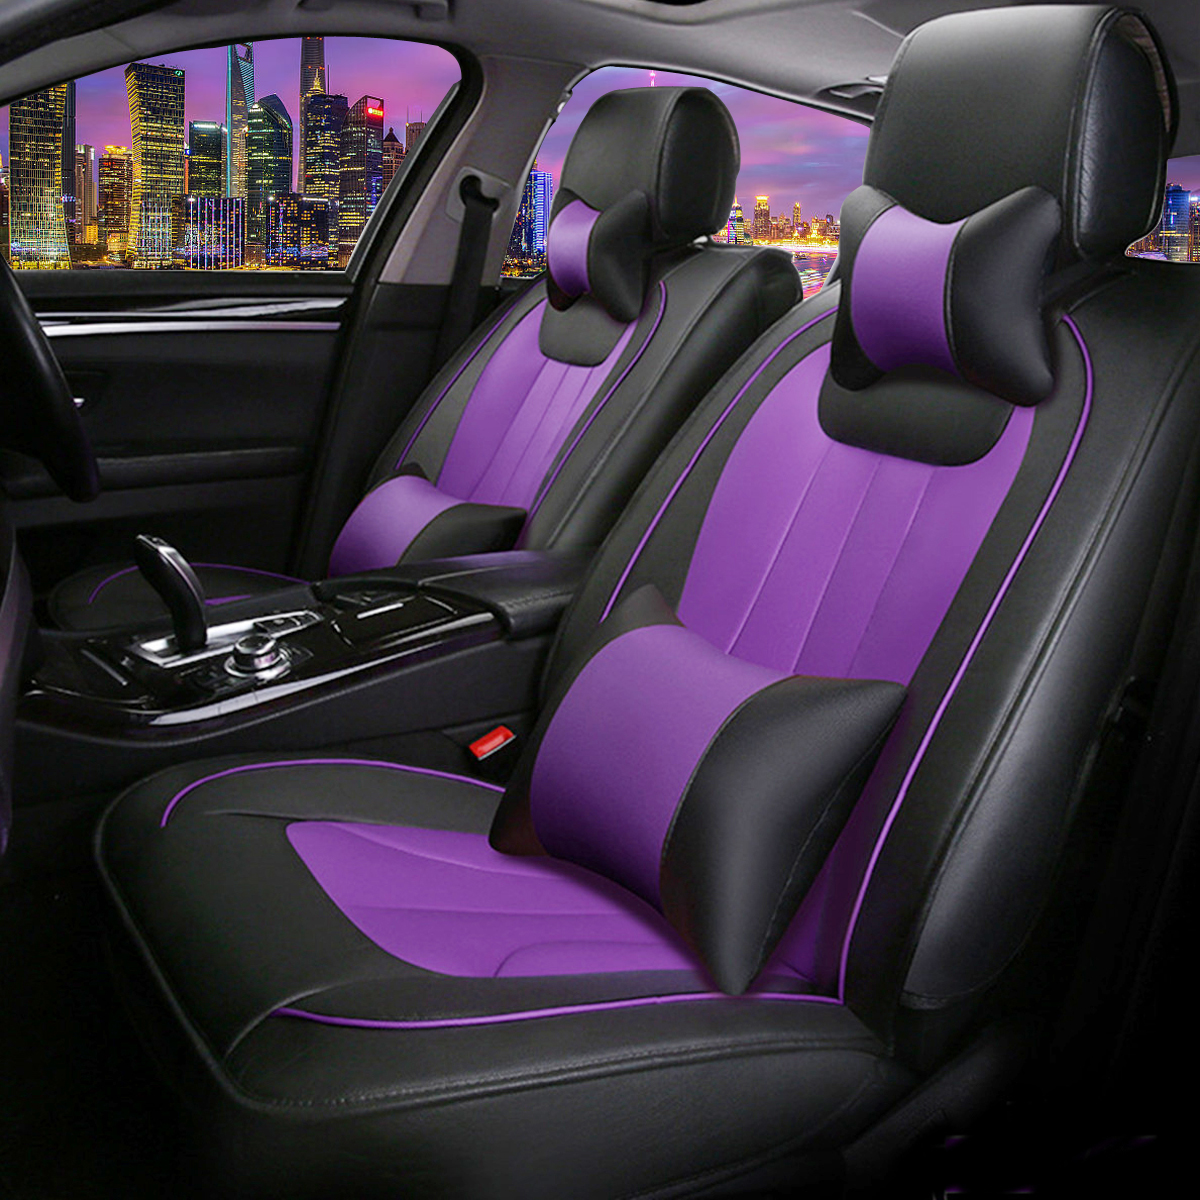 13PCS-PU-Leather-Car-Seat-Cover-Full-Set-Front-Rear-with-Pillow-Waist-Cushion-Universal-for-5-Seats-1327842